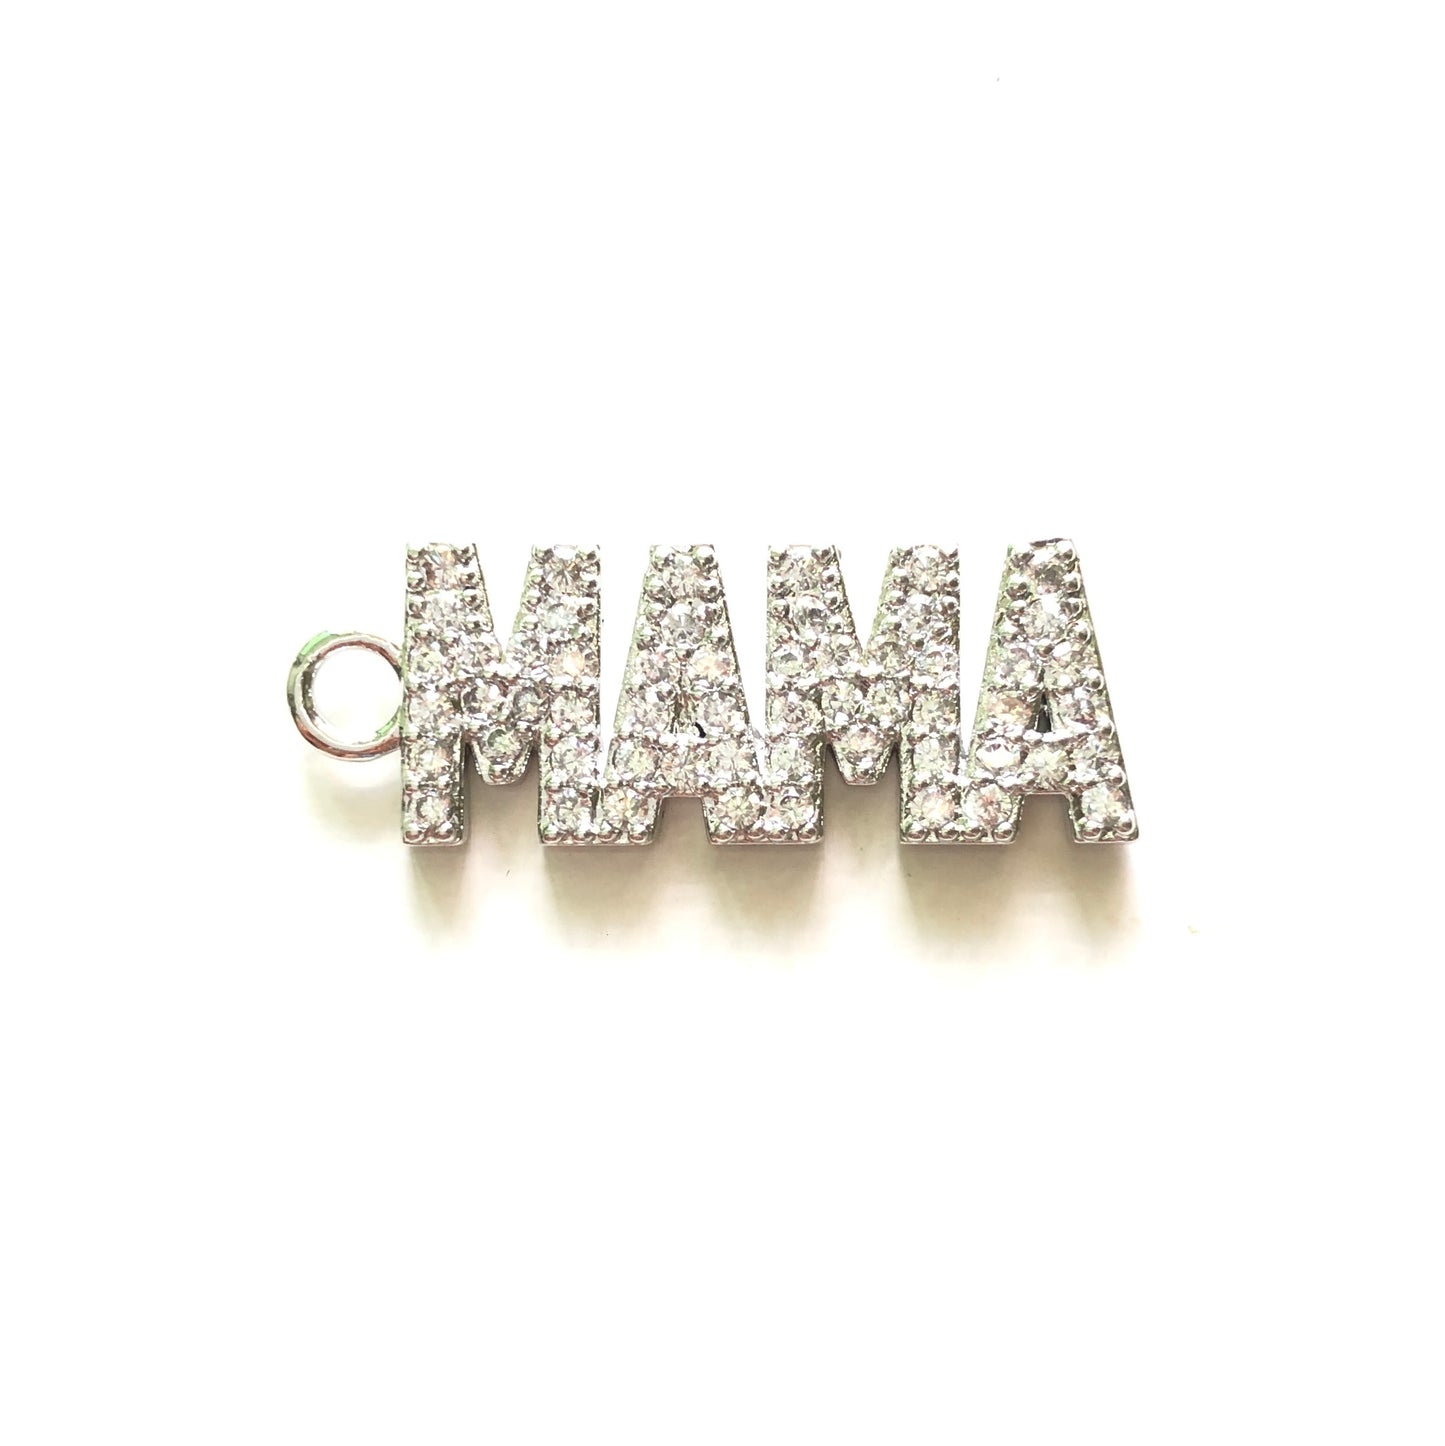 10pcs/lot 31*11mm CZ Paved Mama Charms for Mother's Day Silver CZ Paved Charms Mother's Day Words & Quotes Charms Beads Beyond